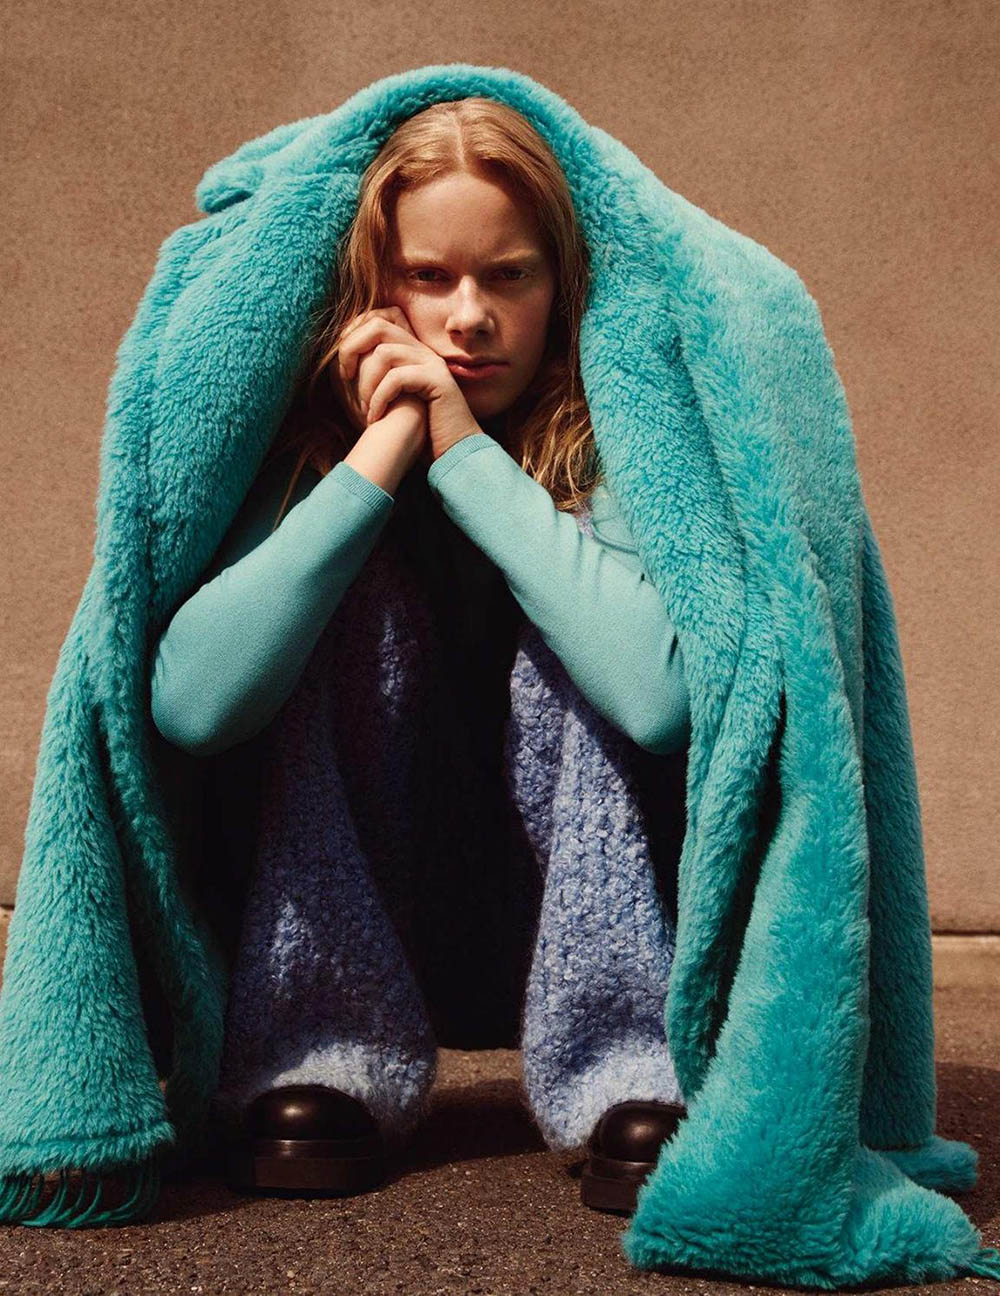 Adele Taska by Misha Taylor for Vogue Russia October 2019